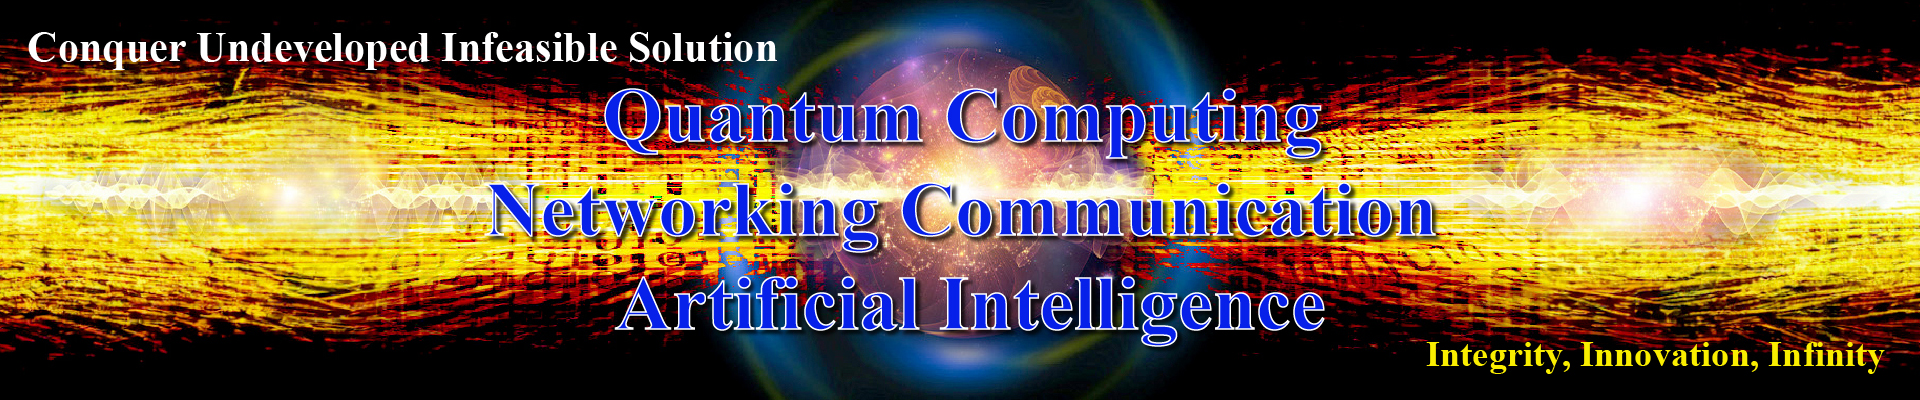 AhP-Tech Inc. is devoted to the future technology of Quantum Computing, networking communication, and Artificial Intelligence.